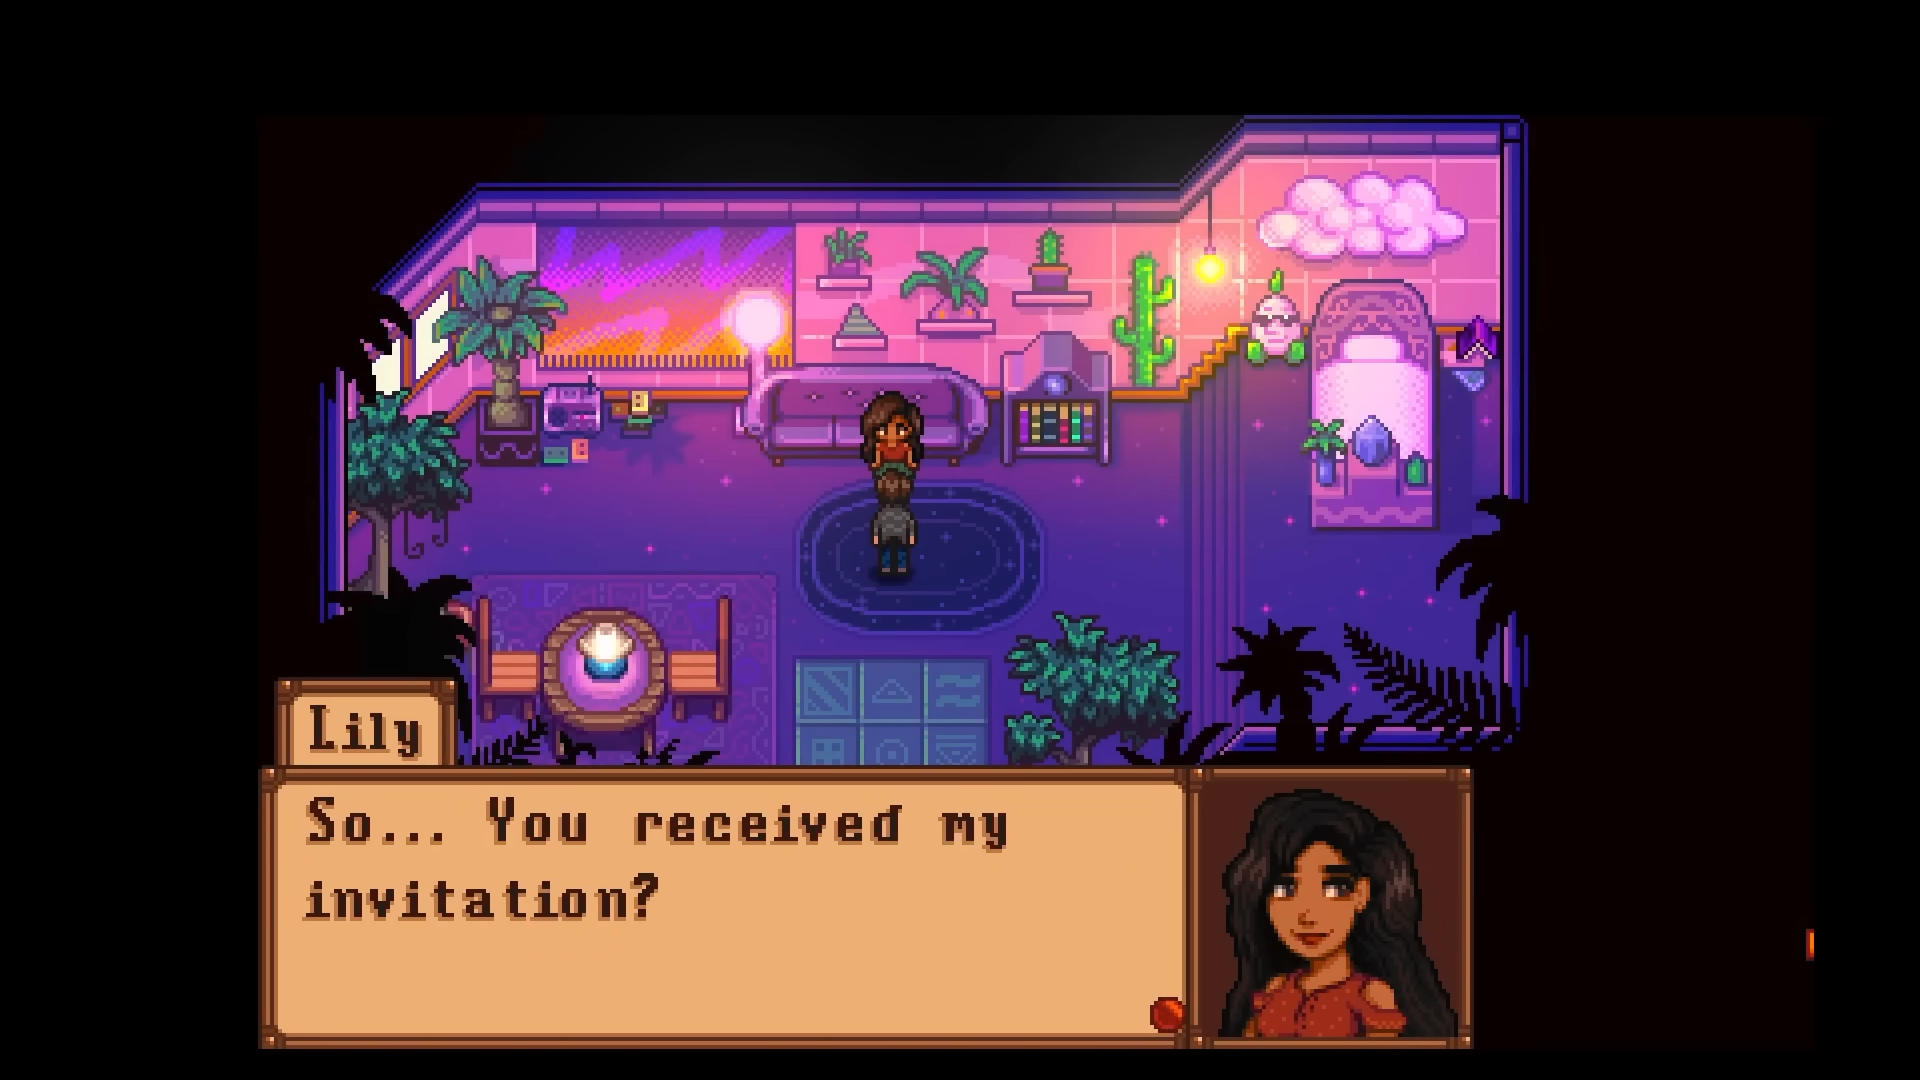 Lily speaking to the player in Haunted Chocolatier in her retrowave house